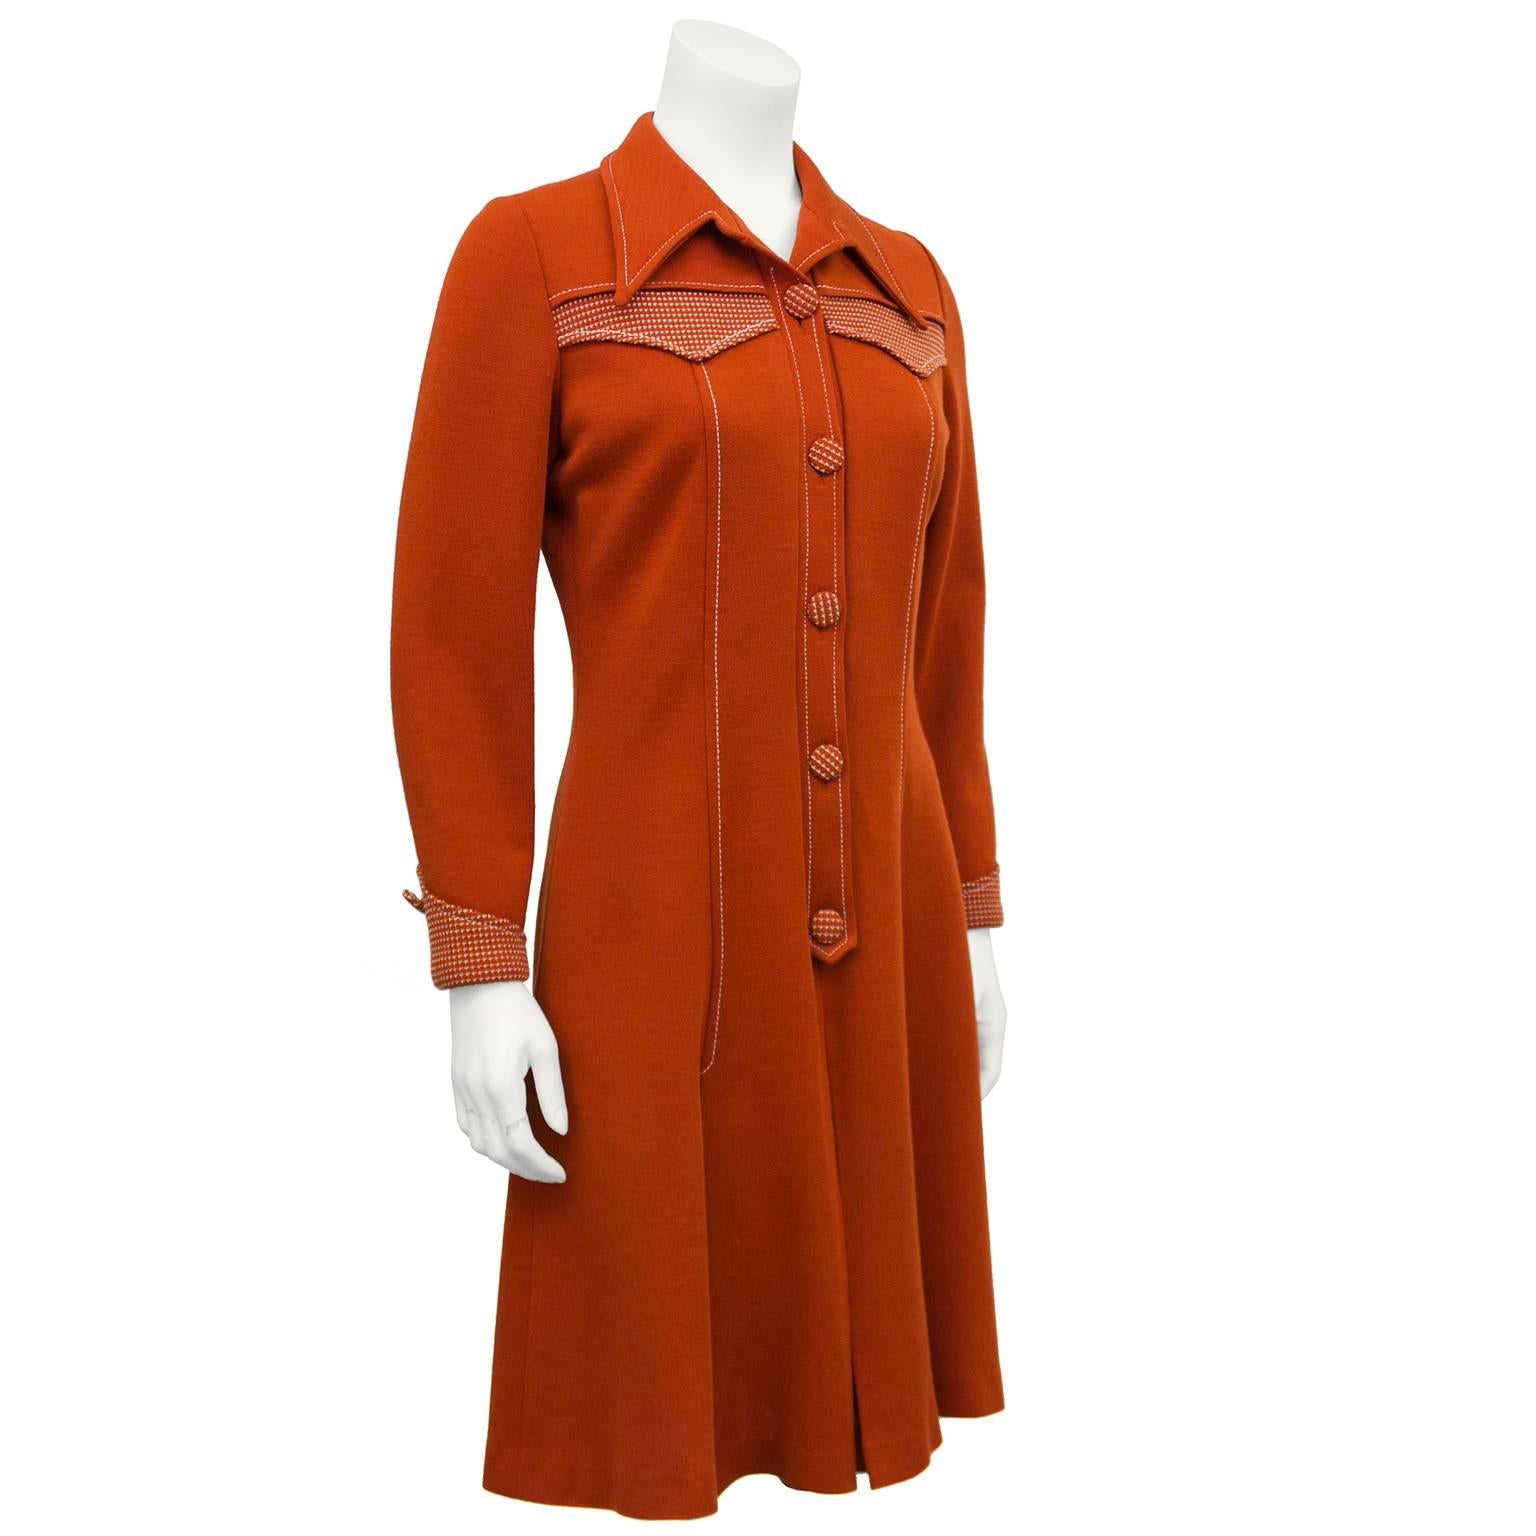 Brick red 'Cowboy' style dress from the 1970s with contrasting stitch detail. The wide, pointed lapel is accented with a contrasting double yoke at the bust line and single along the back. Vertical seams elongate the silhouette and the dress opens